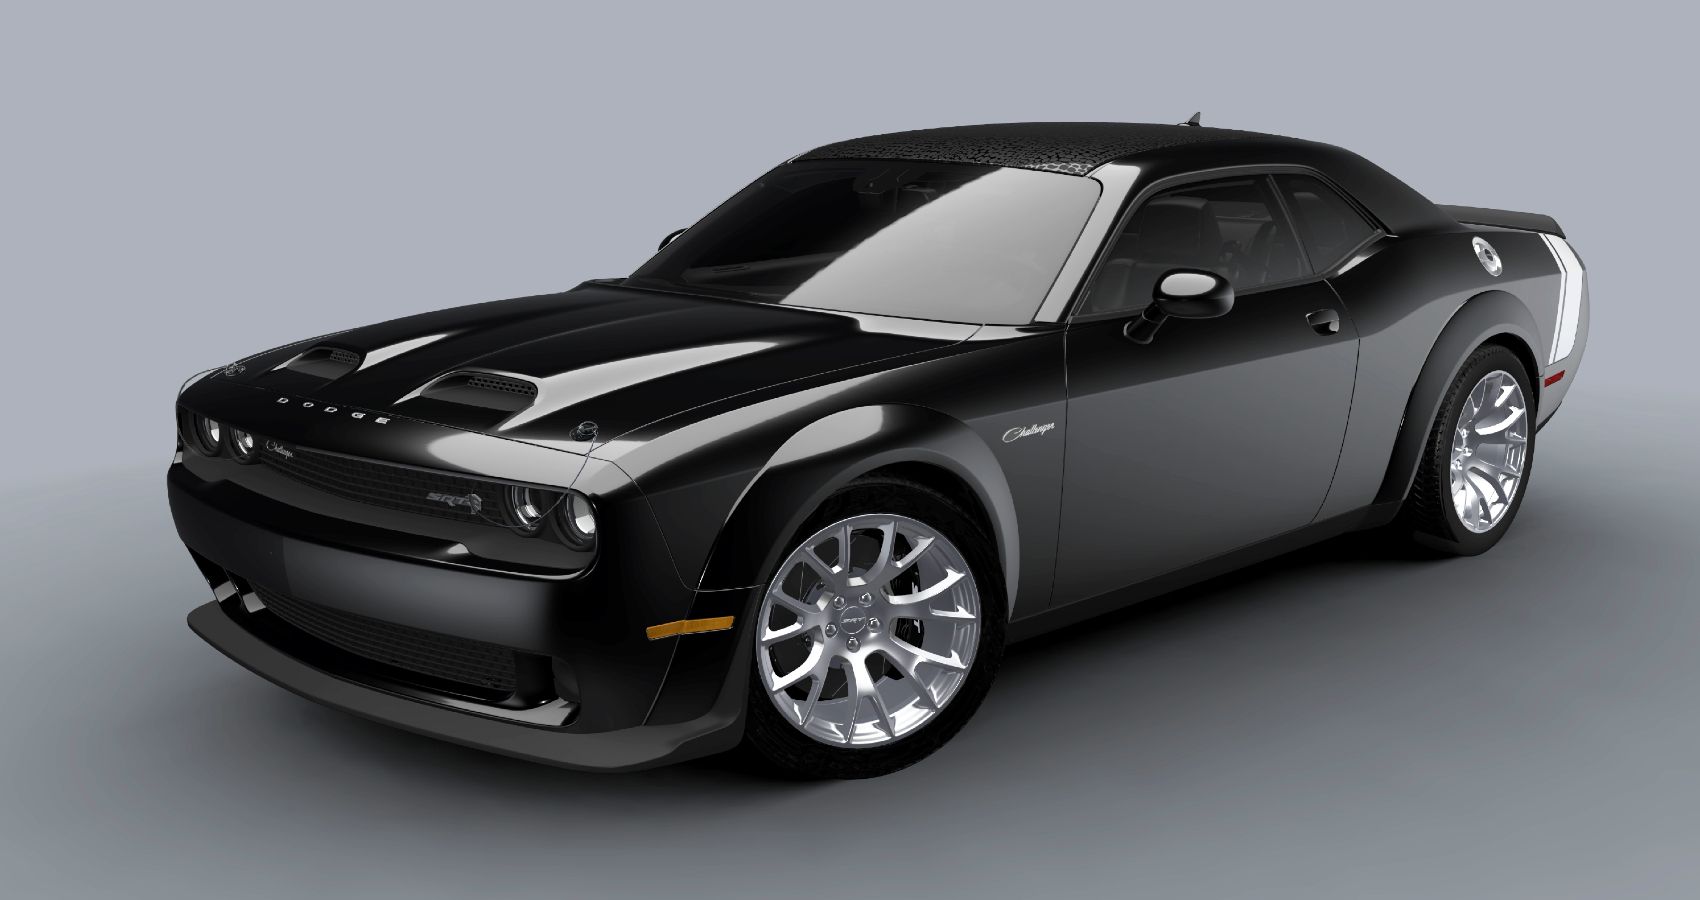 10 Things Every Gearhead Should Know About The New Dodge Challenger